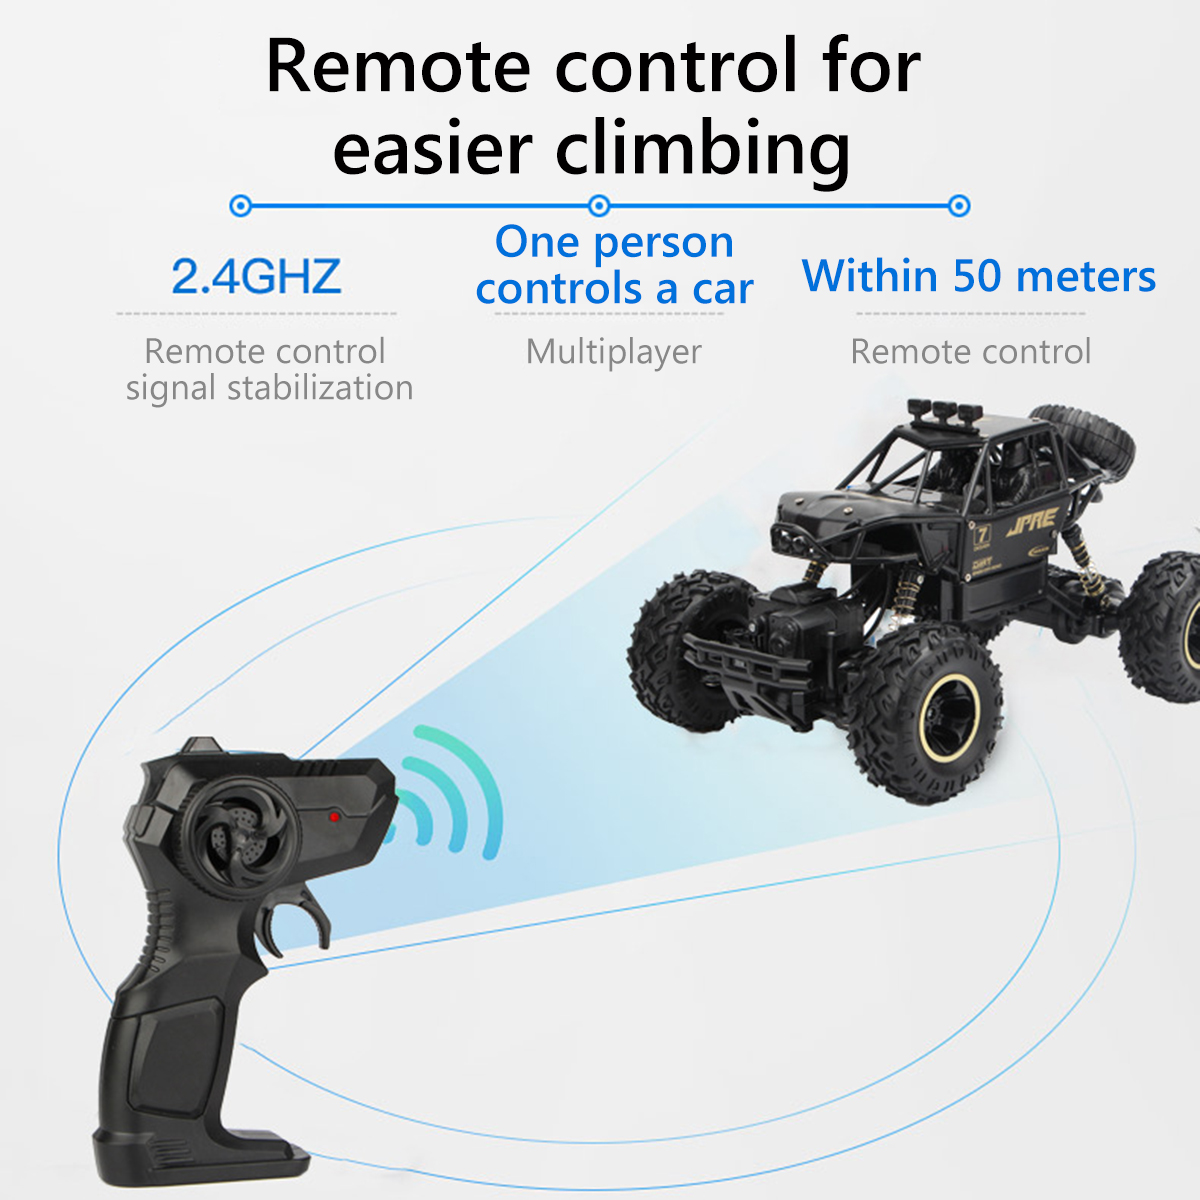 1:16 Alloy Remote Controls Car Monster Trucks, 4WD Climbing RC Cars Off Road, RC Crawler Toys for Boys Kids Gifts - image 7 of 11